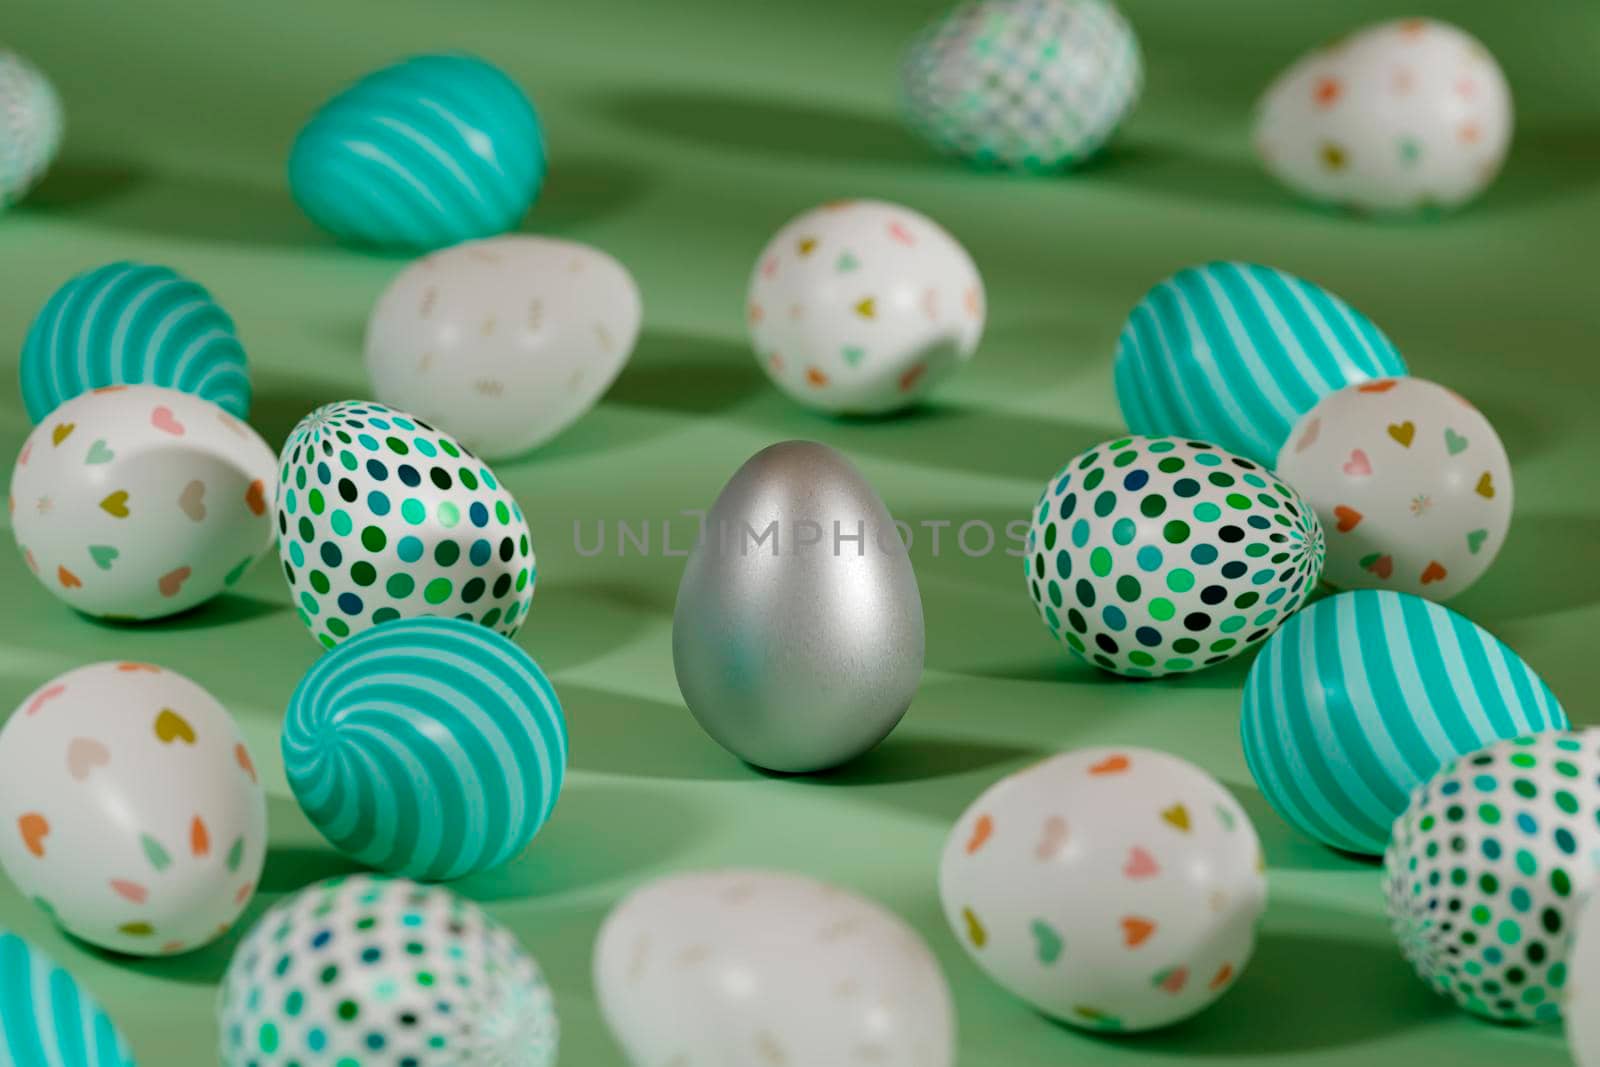 Colored Easter eggs surrounding silver egg on green background. 3d illustration by raferto1973